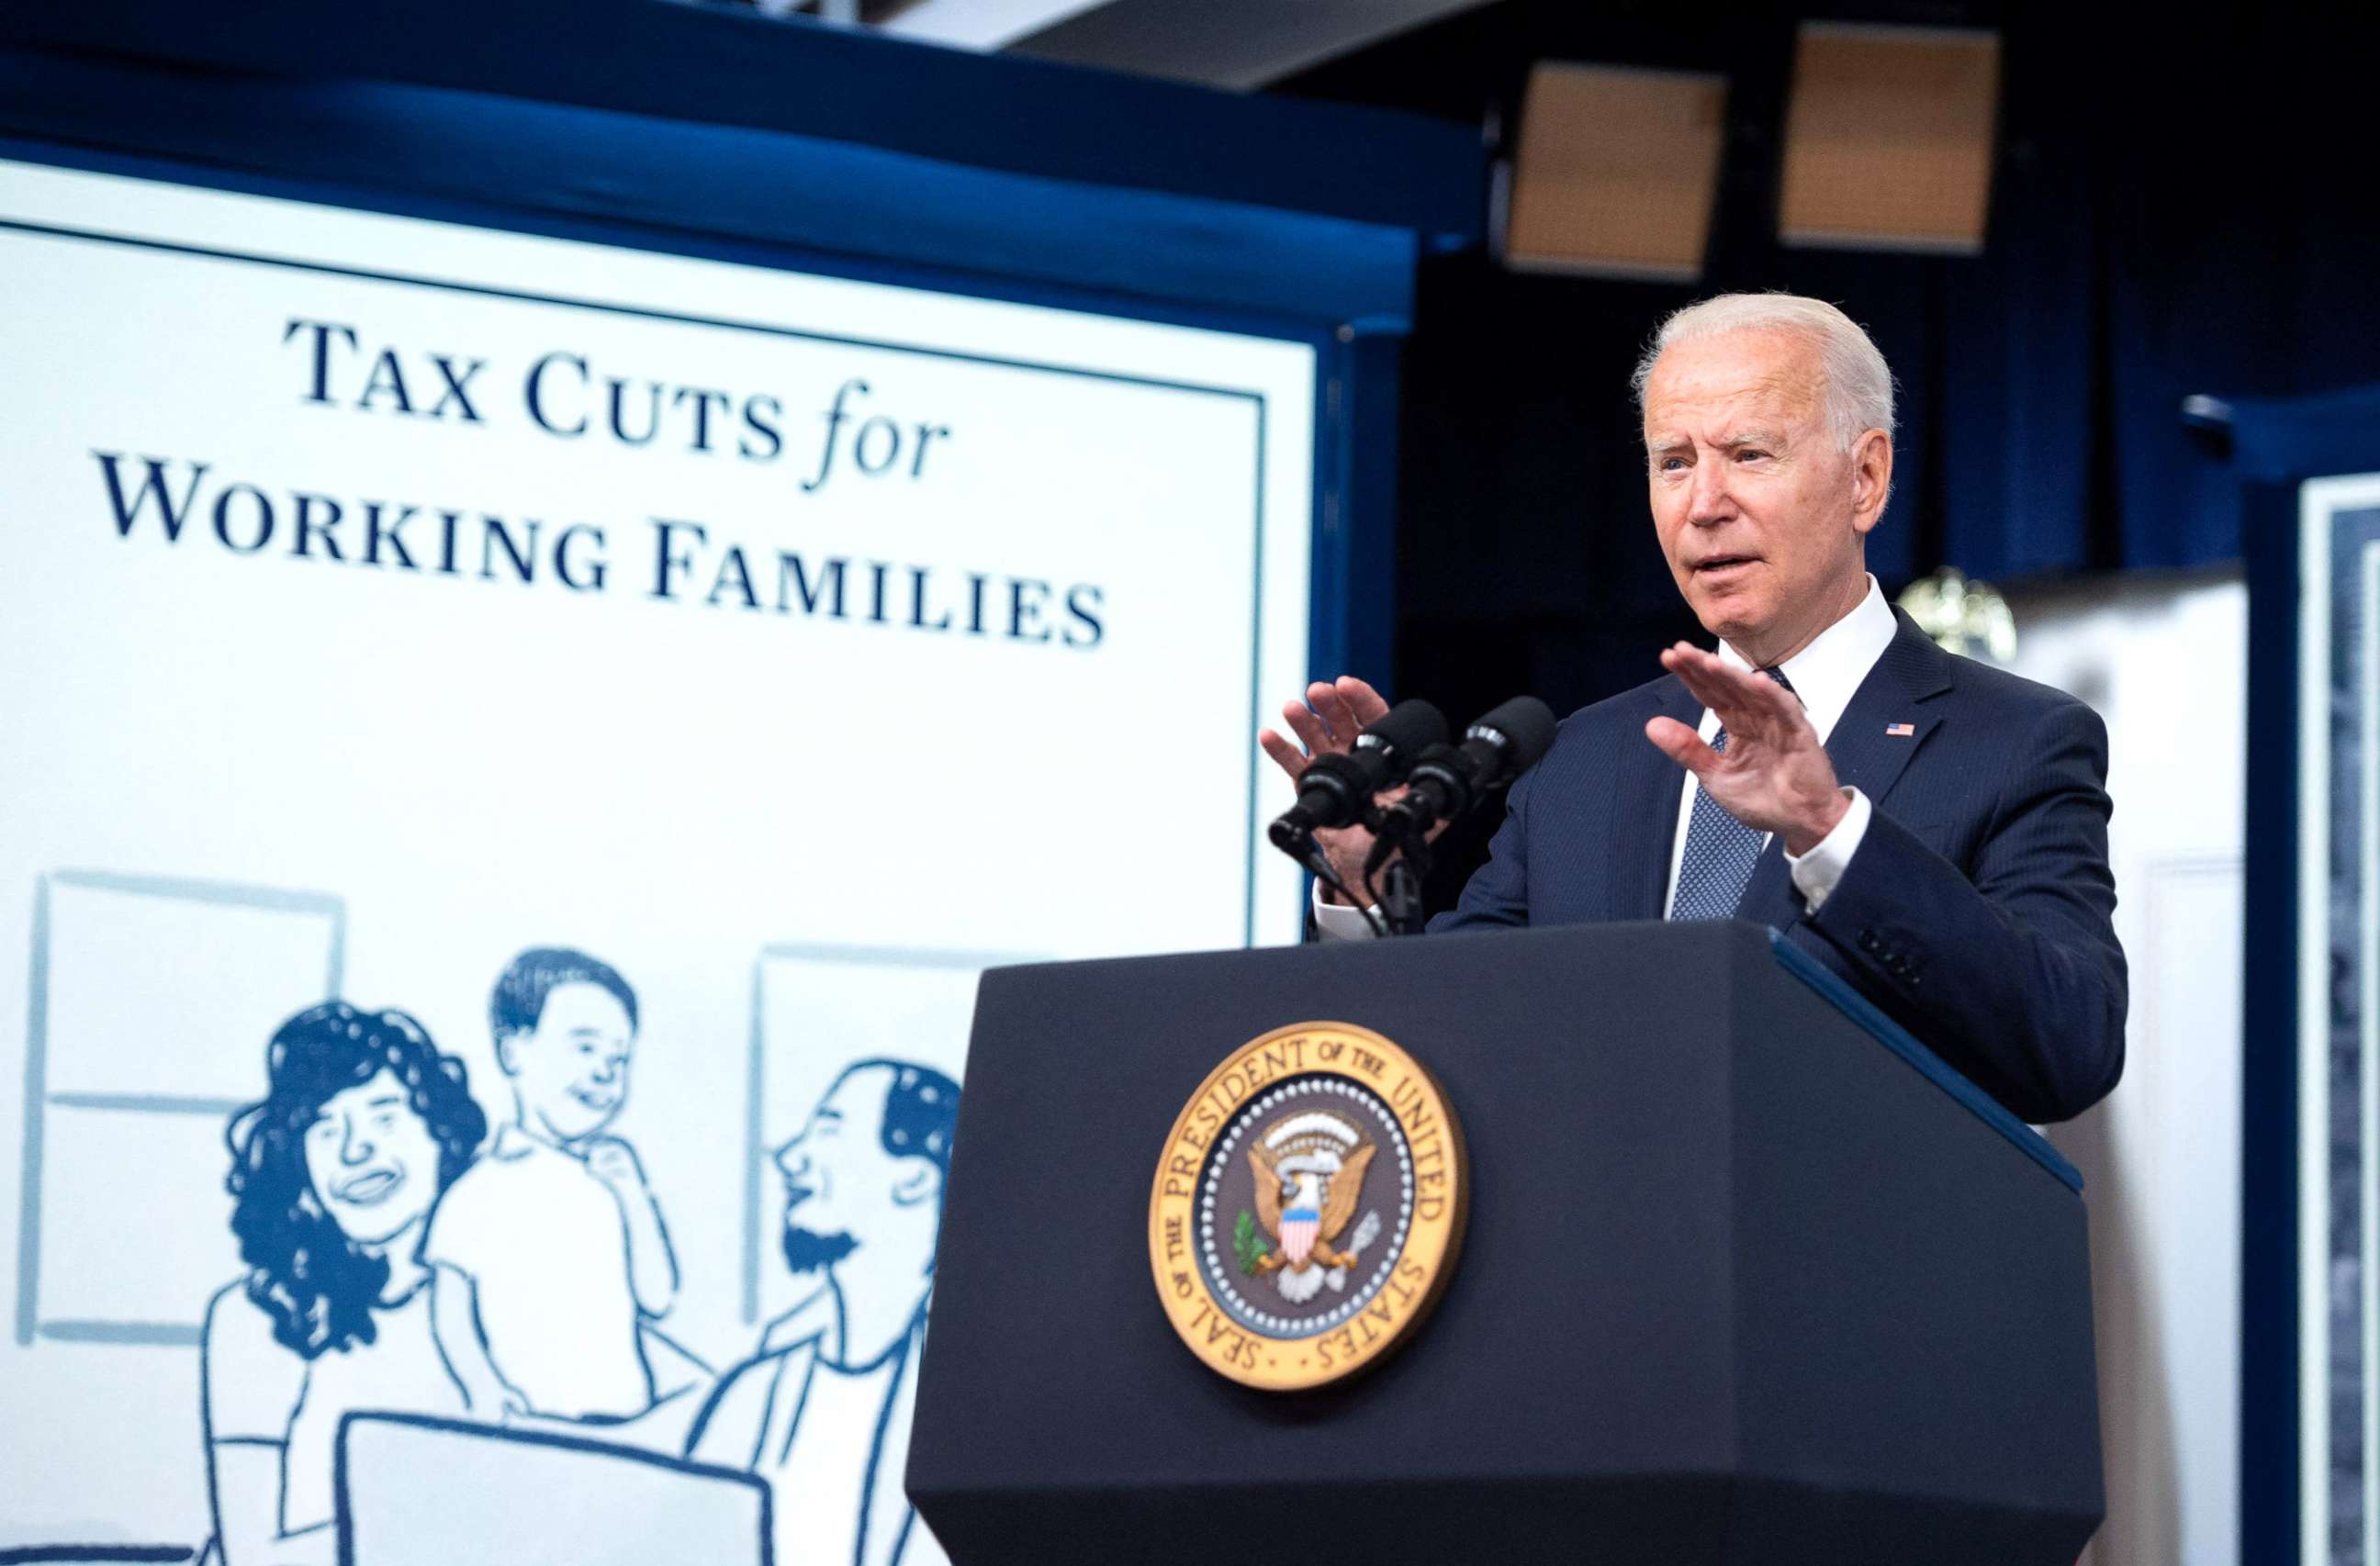 PHOTO: President Joe Biden speaks about the Child Tax Credit relief payments that are part of the American Rescue Plan during an event in Washington, D.C., July 15, 2021. The payments are schedule to start on July 15.